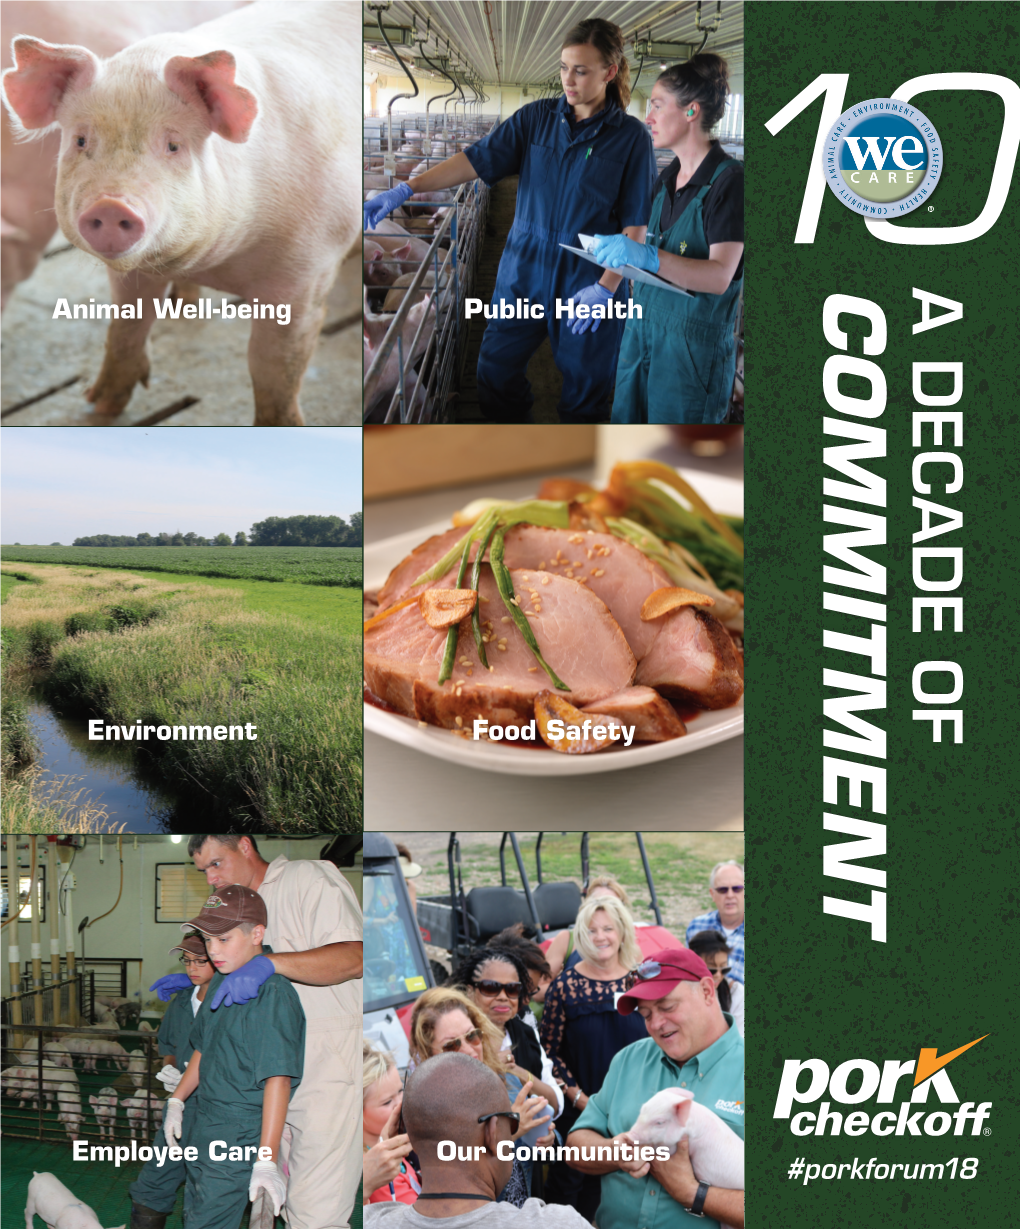 COMMITMENT #Porkforum18 Food Safety Food Public Health Our Communities Environment Employee Care Animal Well-Being